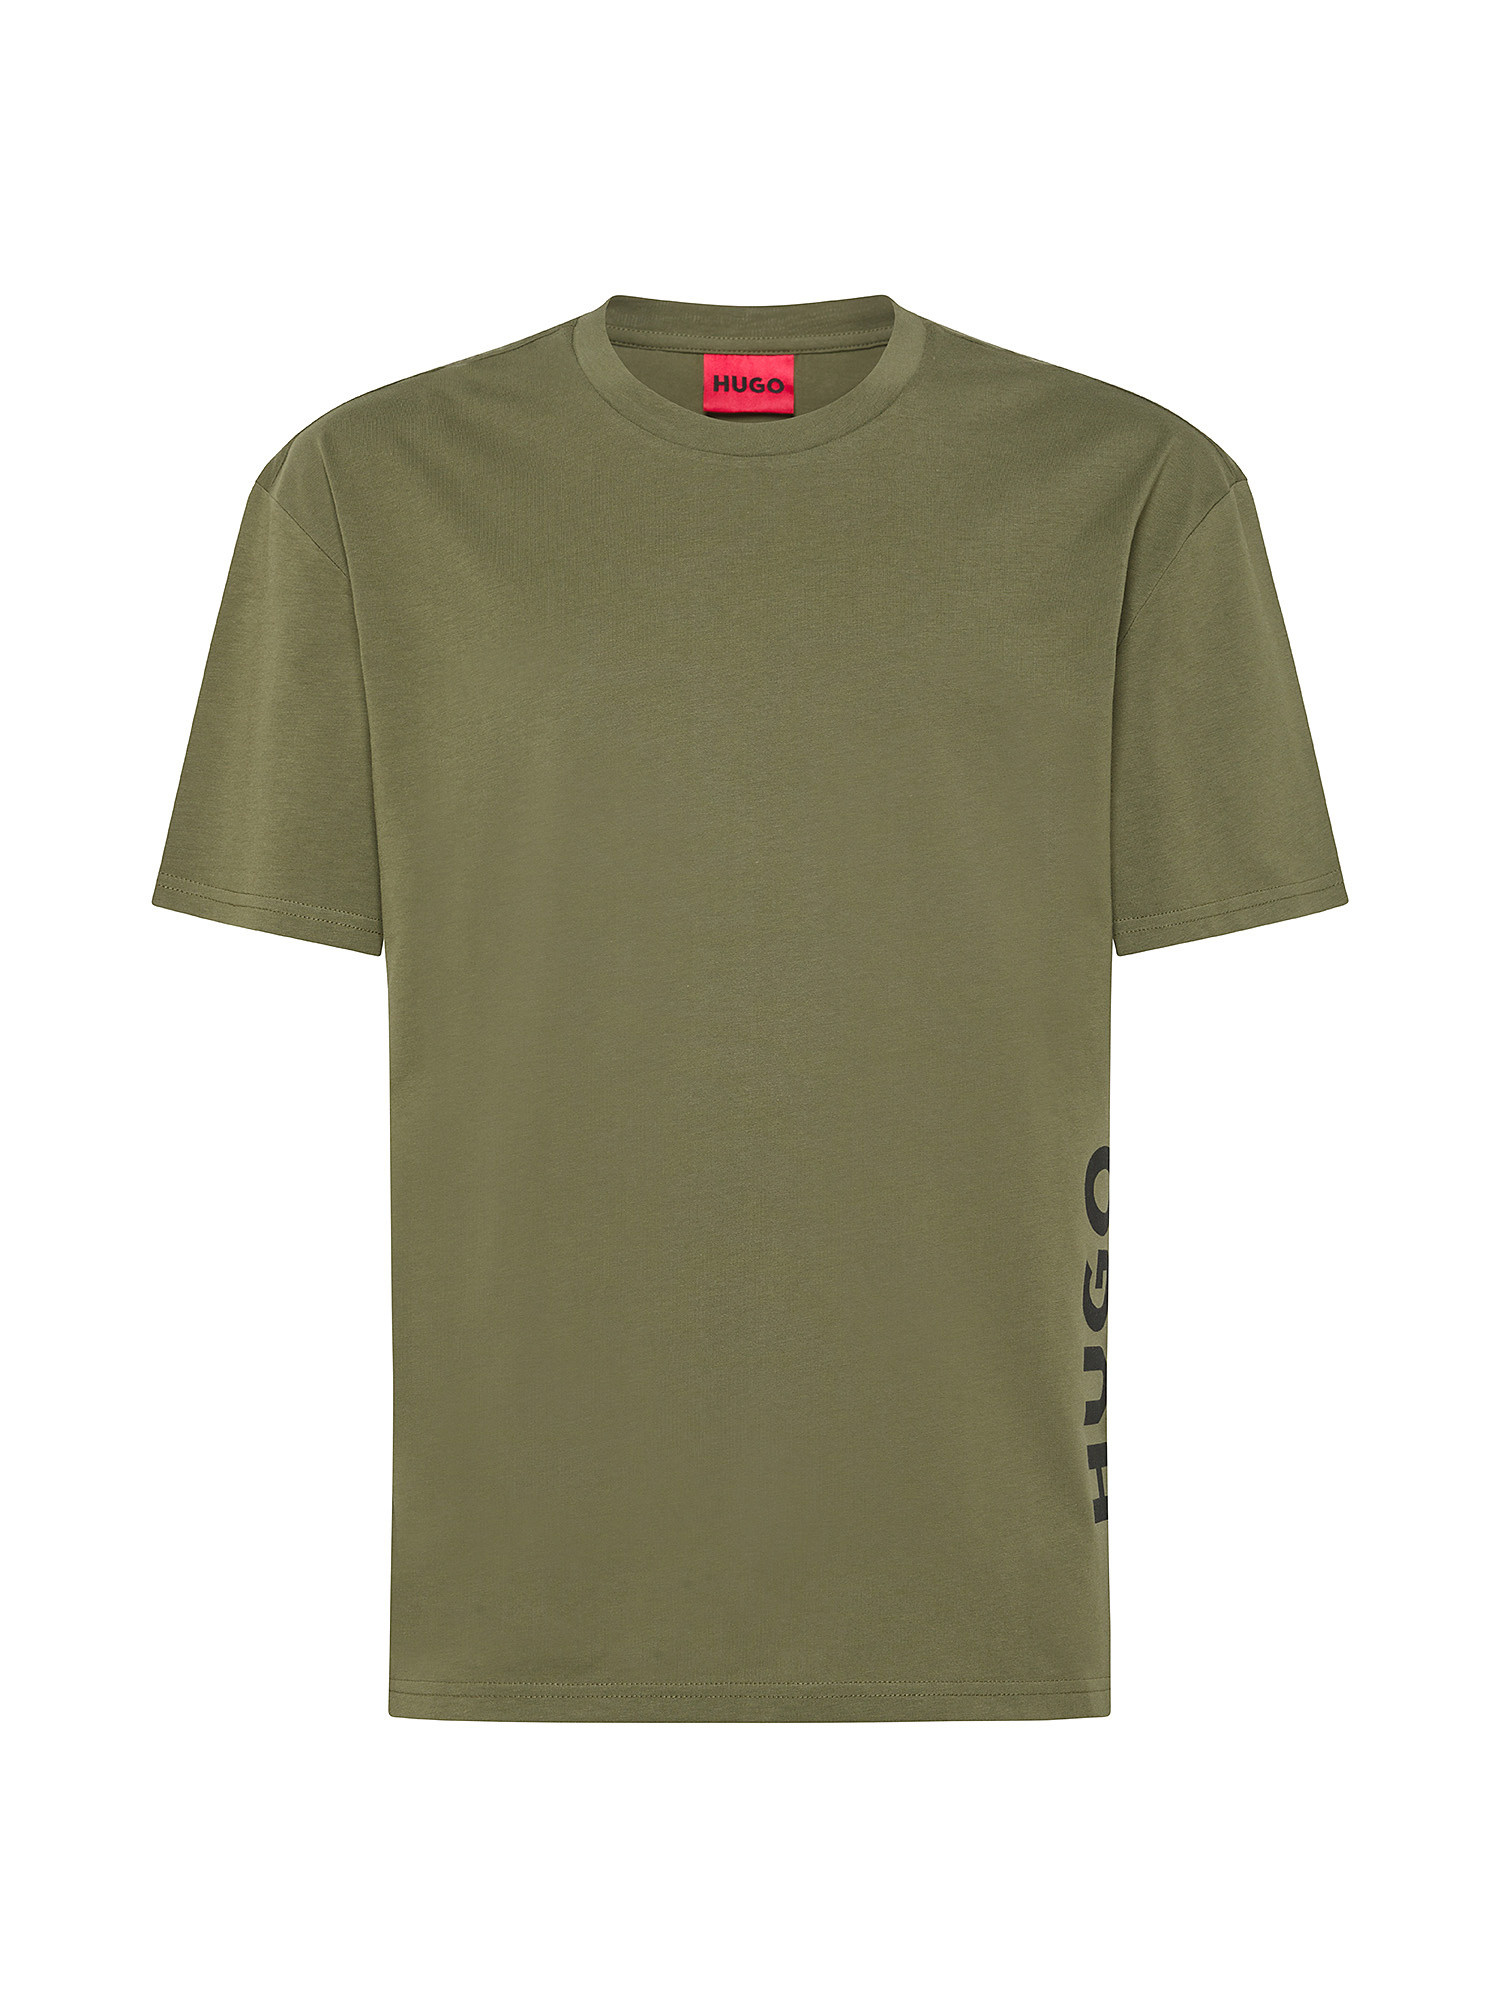 Hugo - T-shirt con stampa logo in cotone, Verde scuro, large image number 0